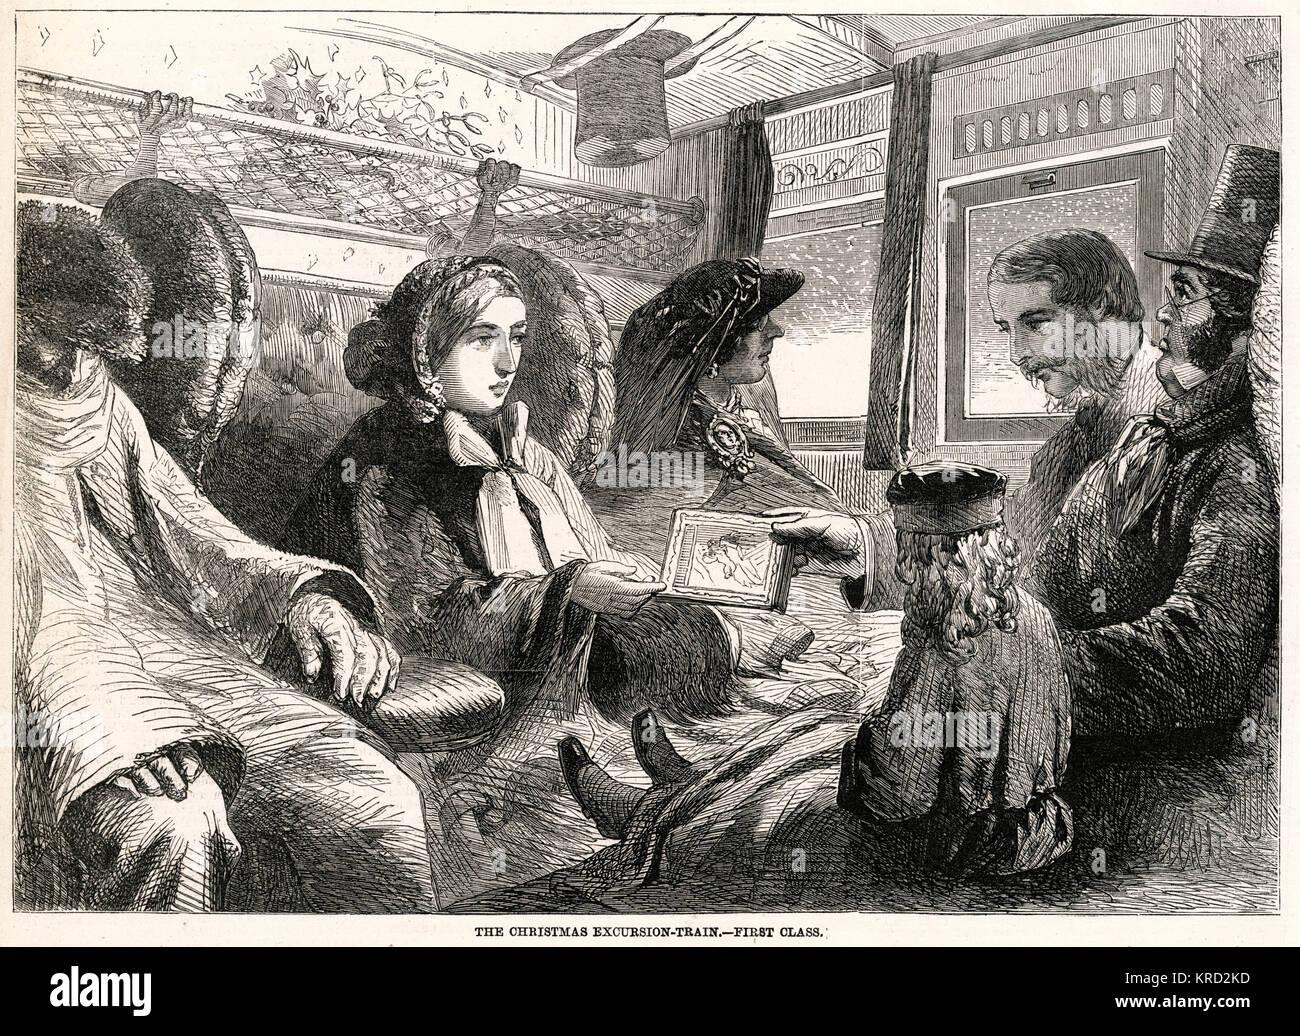 Crowed First class passengers on their way home for Christmas.     Date: 1859 Stock Photo